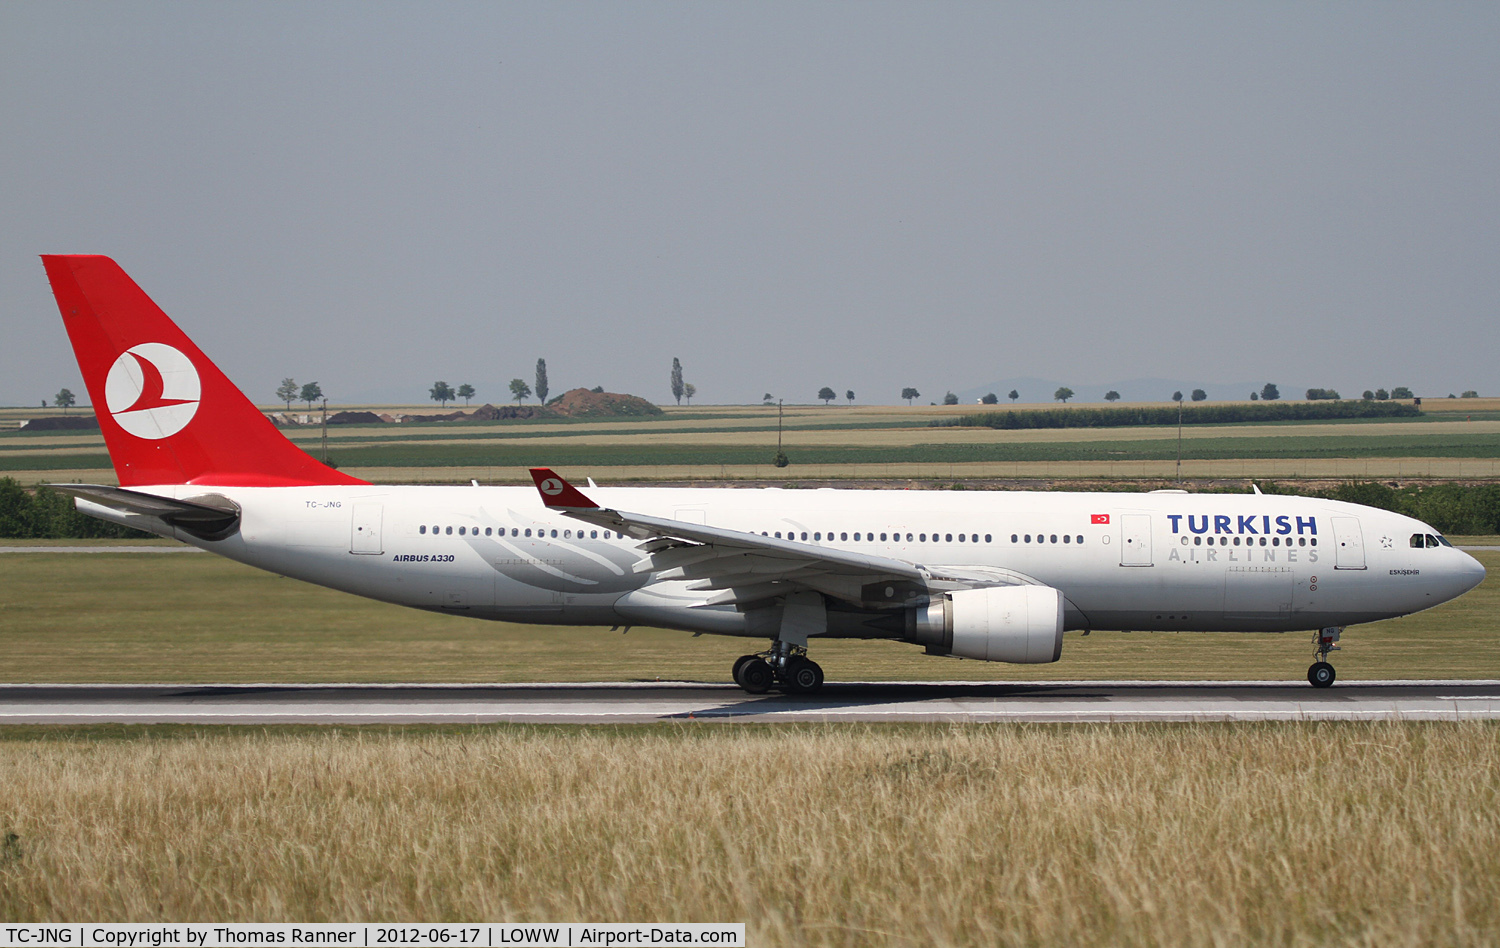 TC-JNG, 2002 Airbus A330-202 C/N 504, Turkish Airlines Airbus A330